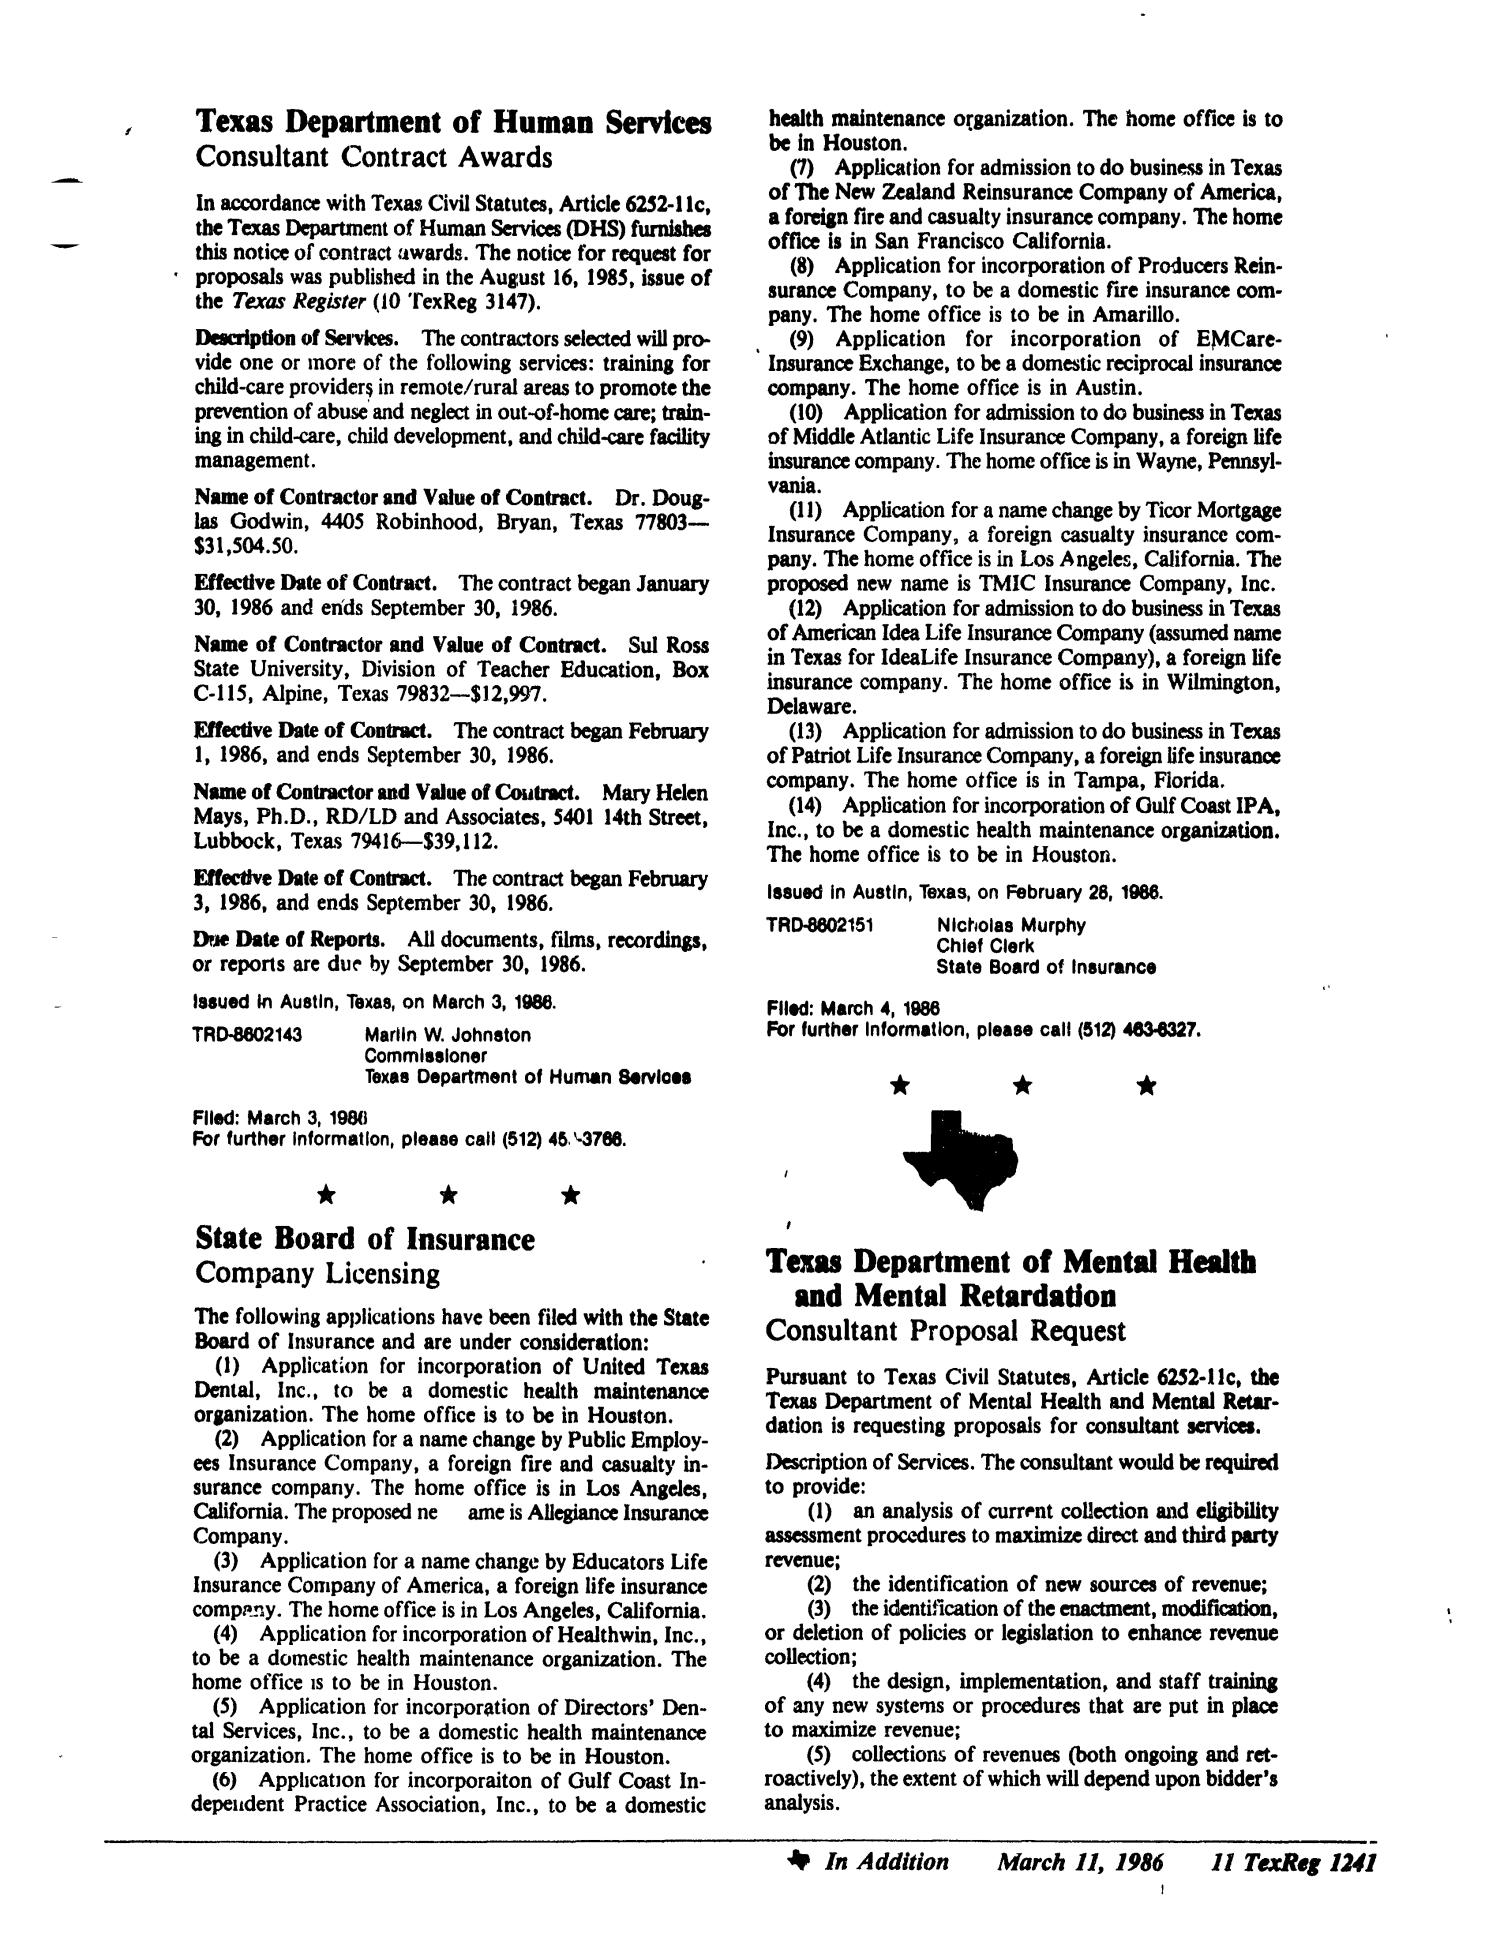 Texas Register, Volume 11, Number 19, Pages 1163-1244, March 11, 1986
                                                
                                                    1241
                                                